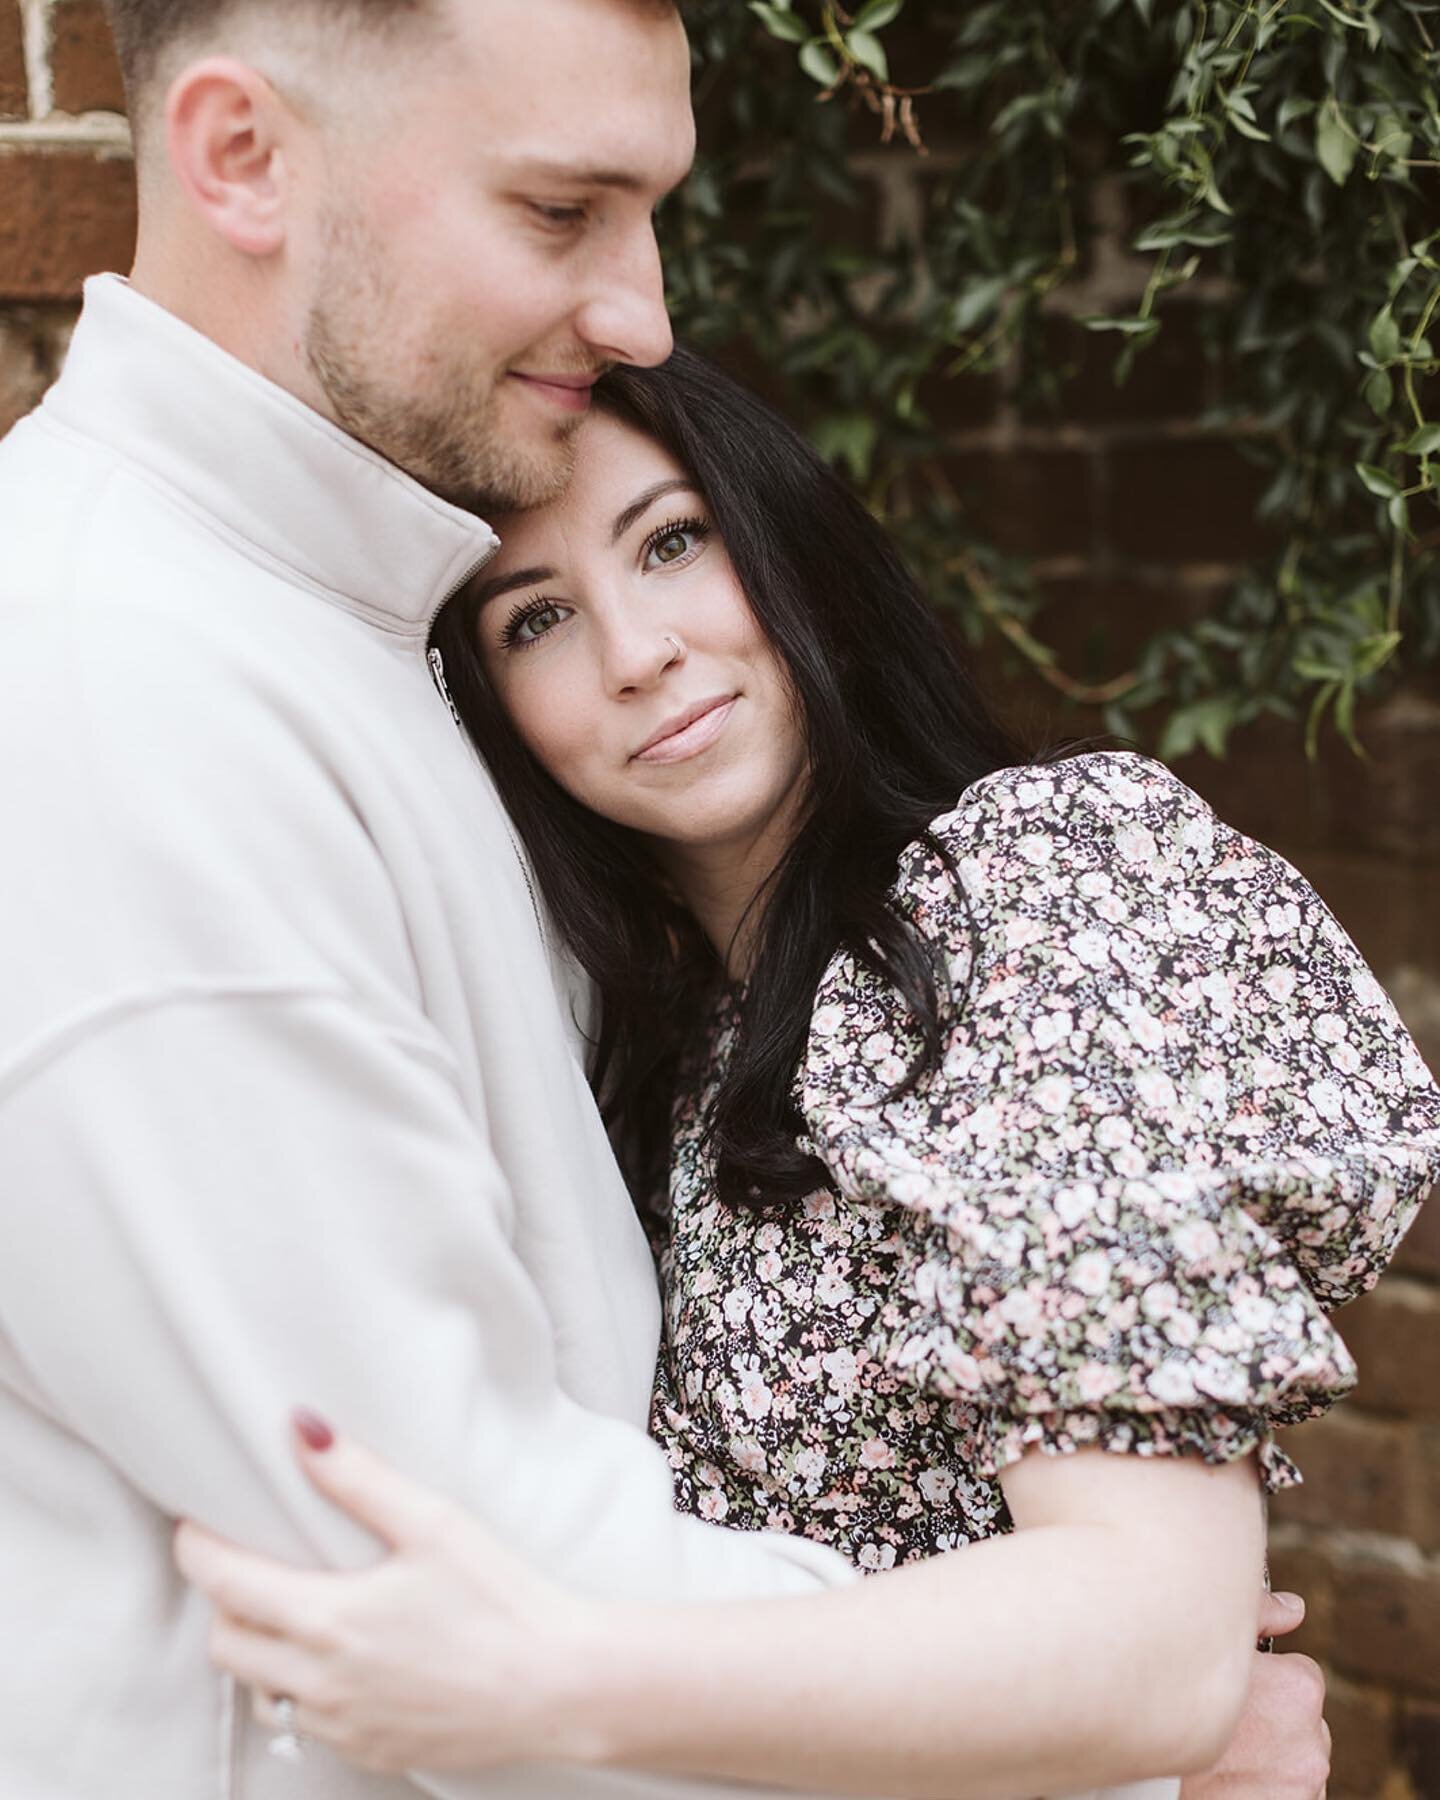 Curtis and I spent our honeymoon in Charleston, SC and I have loved jumping on any chance to go back and walk those beautiful cobble stone streets. Photographing Kasie and Adam for their anniversary in the Low Country was so fun. I loved reconnecting